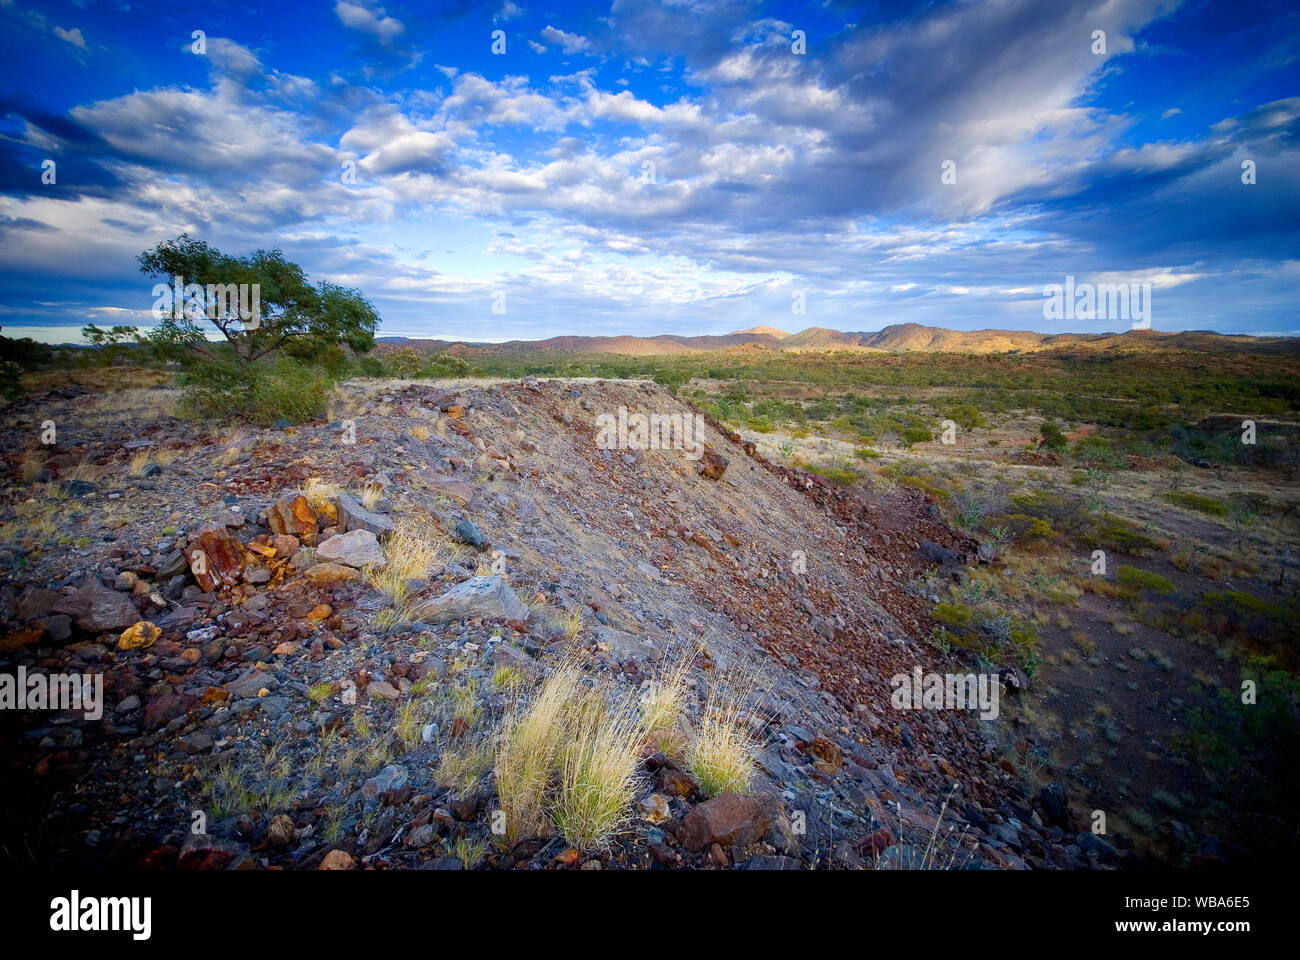 Piles of overburden at abandoned Mary Kathleen uranium mine, closed in 1982.  The land has been rehabilitated.  Selwyn Range between Mount Isa and Clo Stock Photo